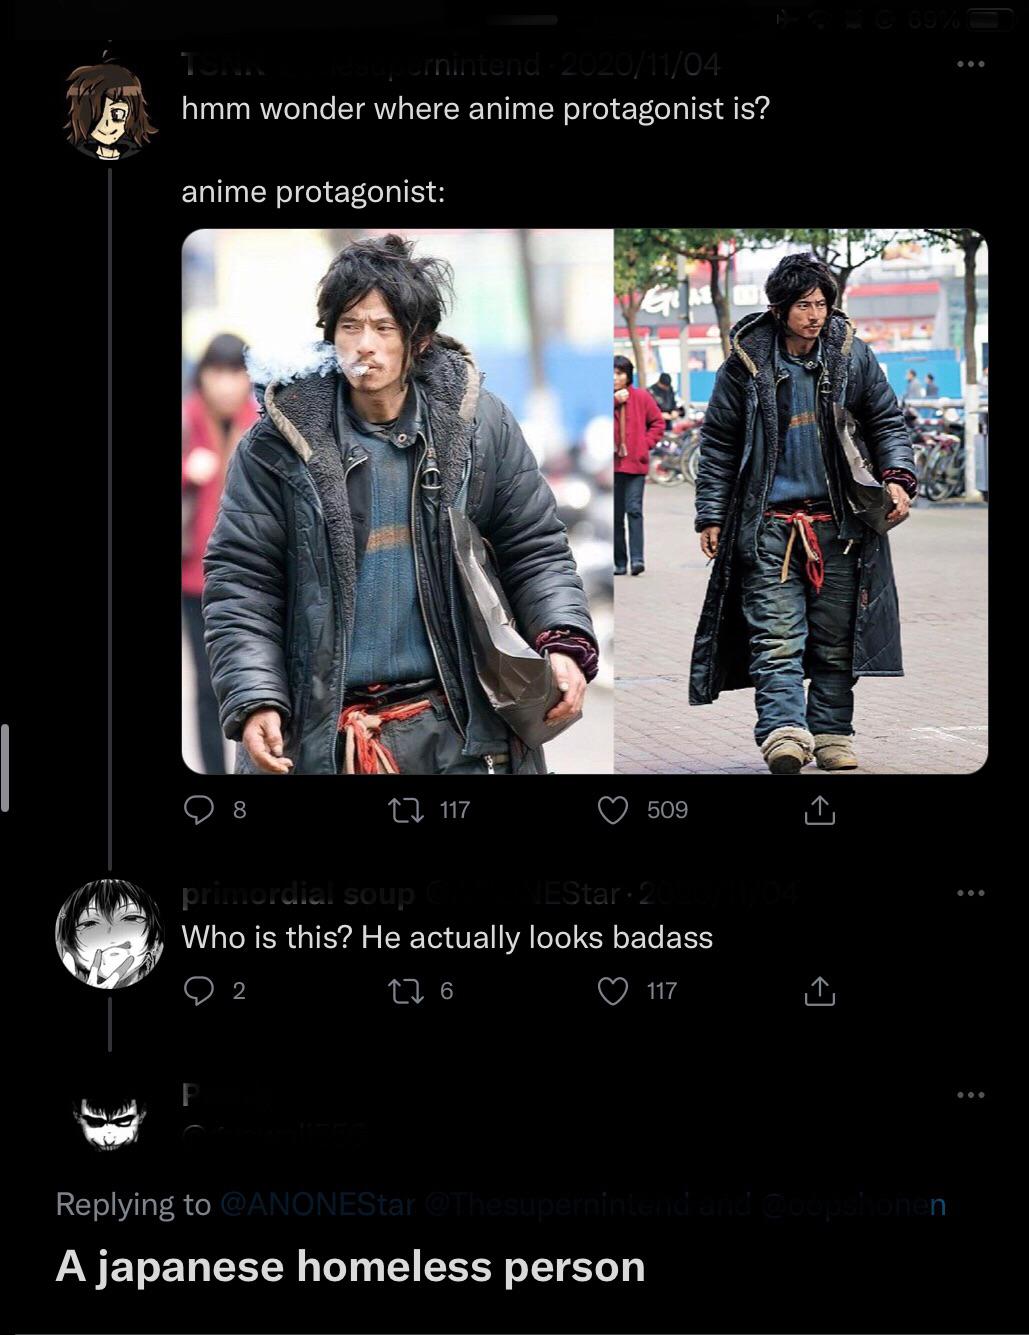 japanese homeless person anime protagonist - nintend hmm wonder where anime protagonist is? anime protagonist Karina 8 22 117 509 primordial soup EStar 2 Who is this? He actually looks badass 276 117 ~ em mindenen A japanese homeless person